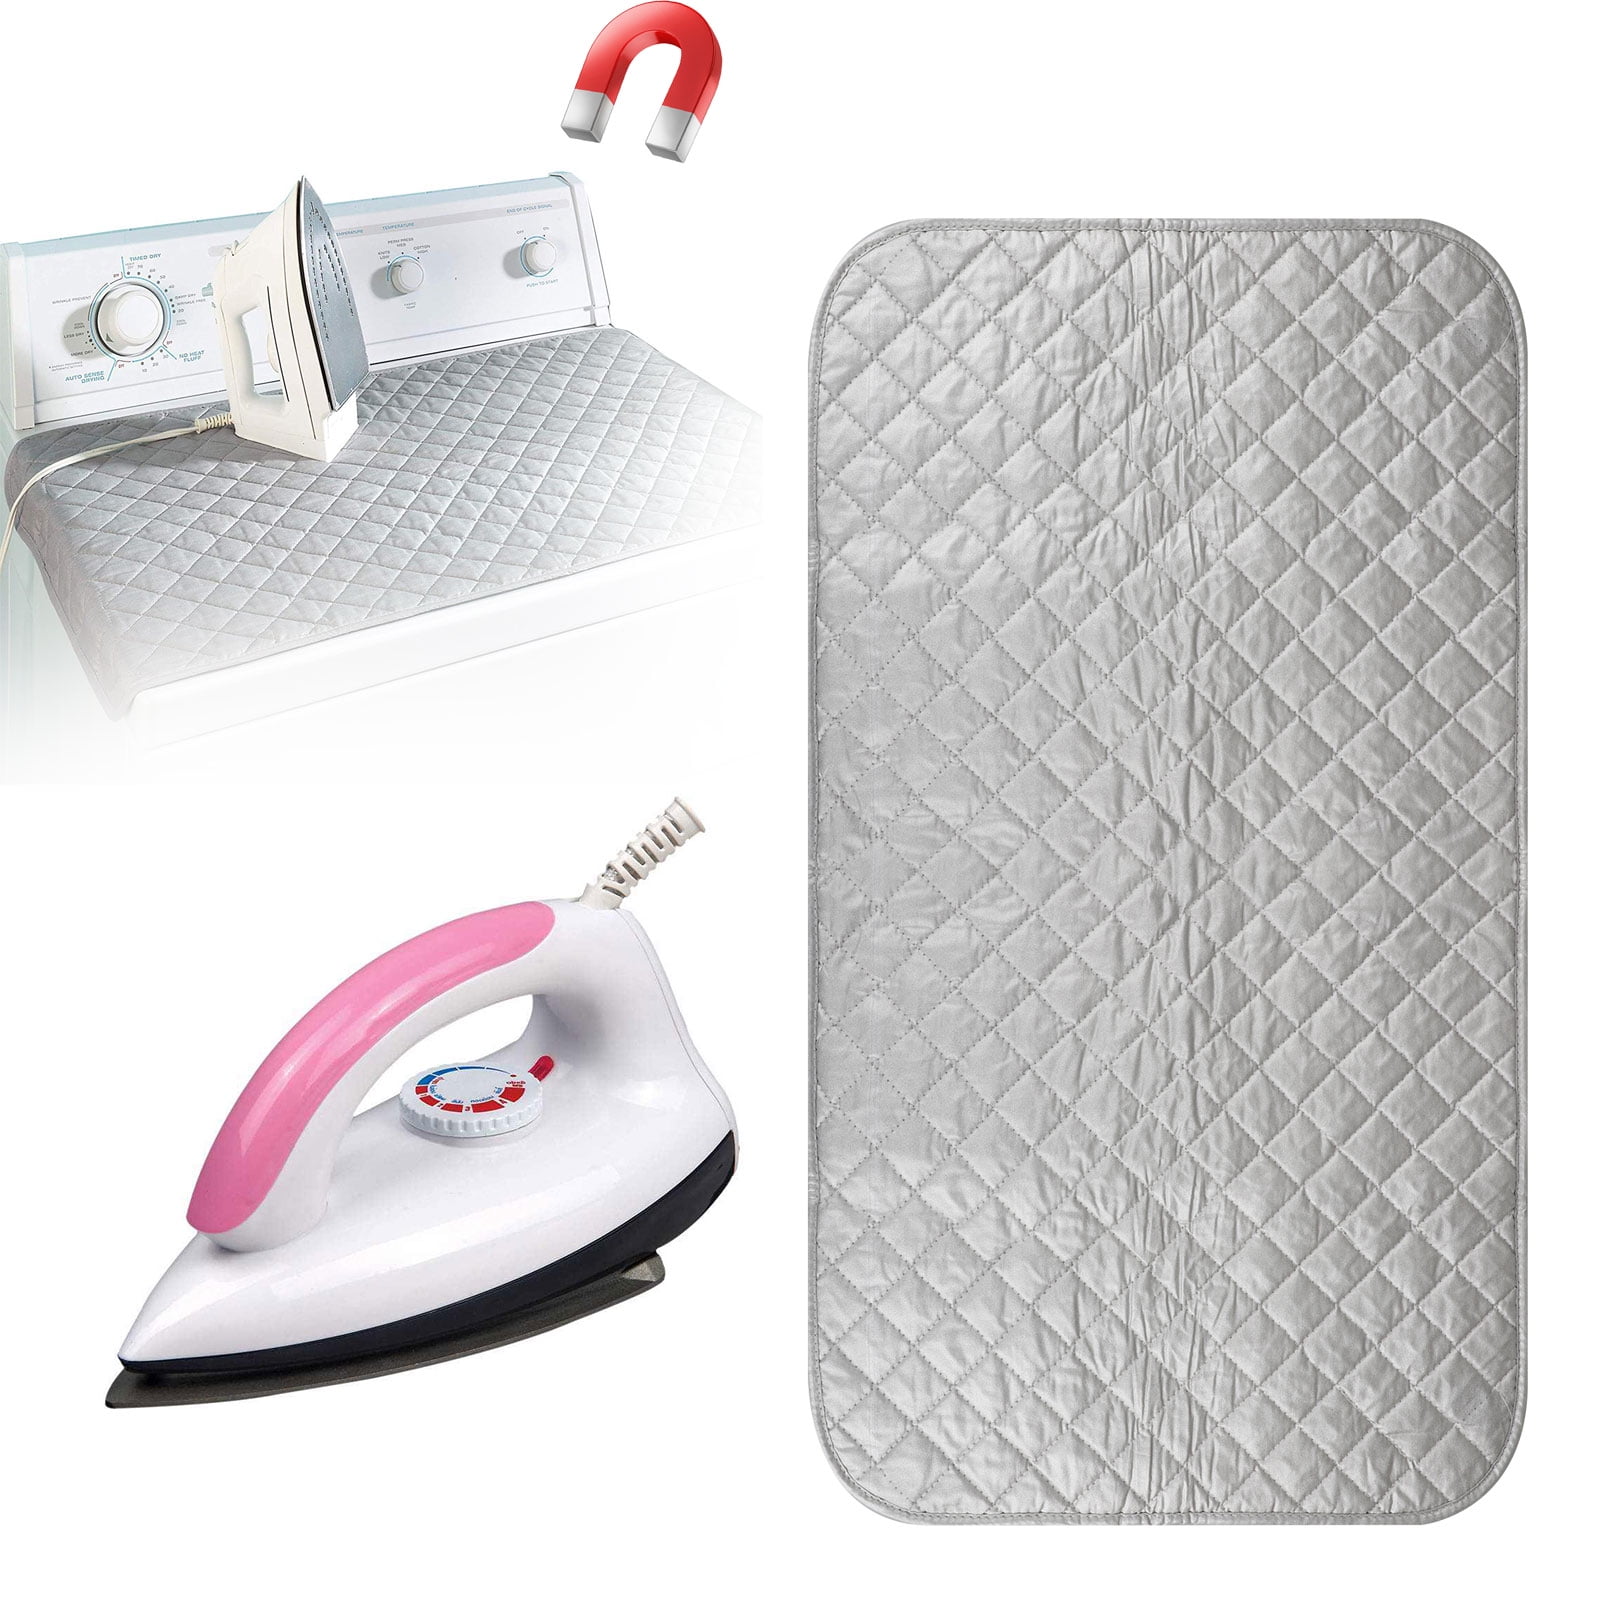 Heat Resistant Ironing Cloth Protective Insulation Pad-hot Home Ironing Mat 